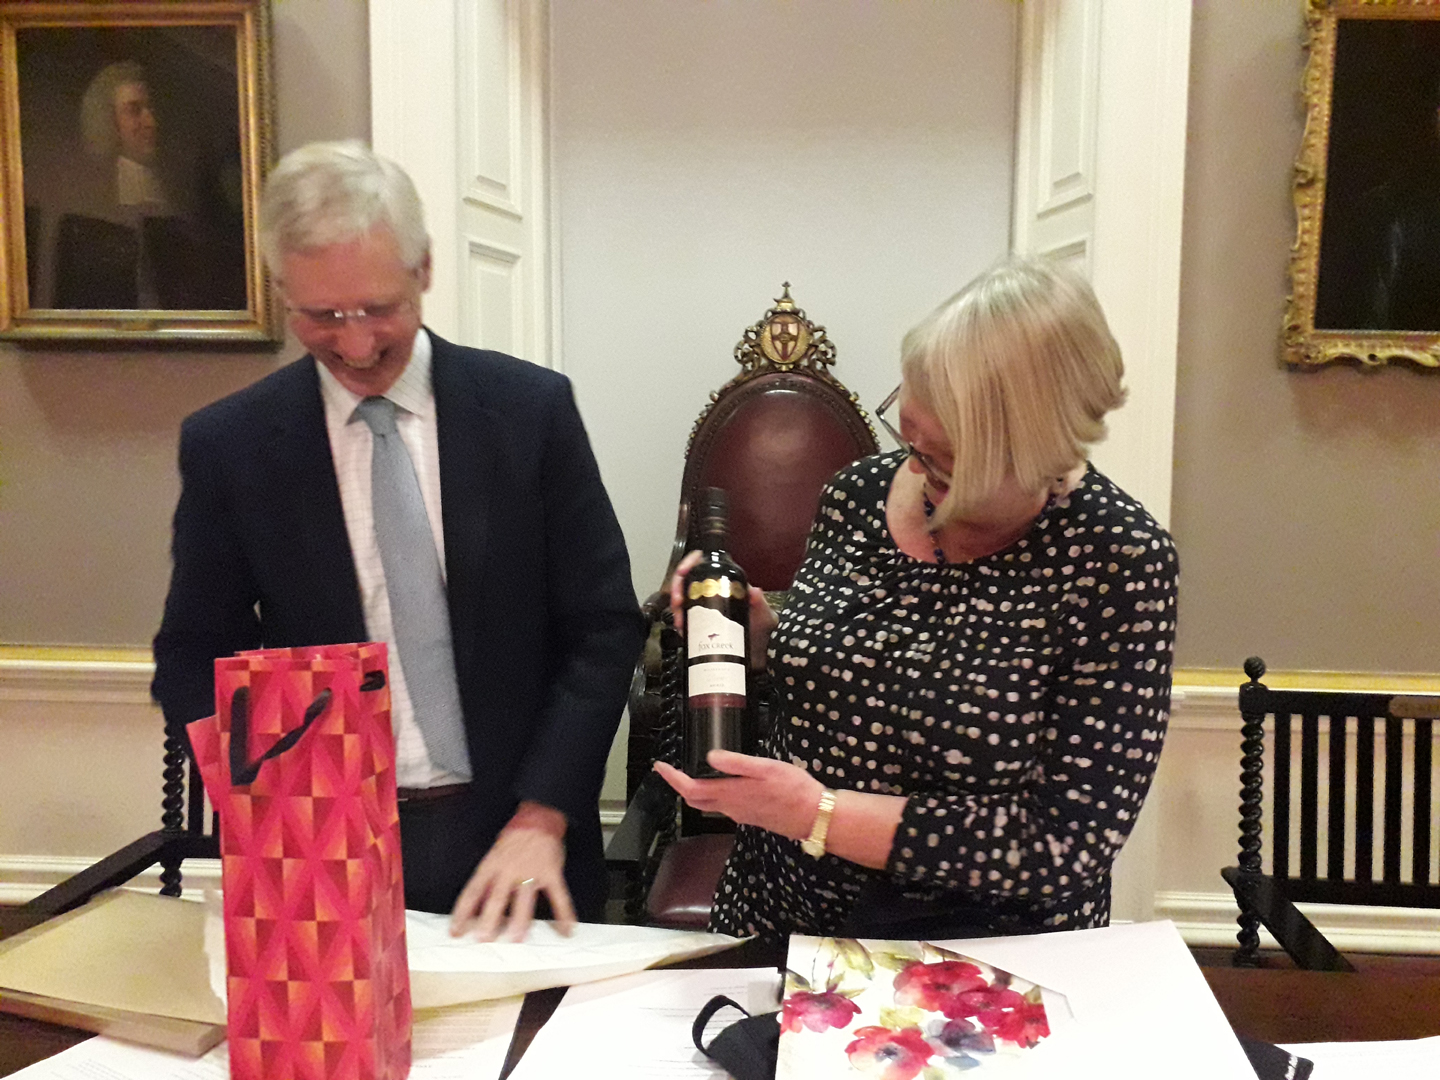 A lovely farewell to out-going IIC President, Sarah Staniforth (right), as we welcome in Julian Bickersteth (left) as the new President of IIC. Image courtesy of Jane Henderson